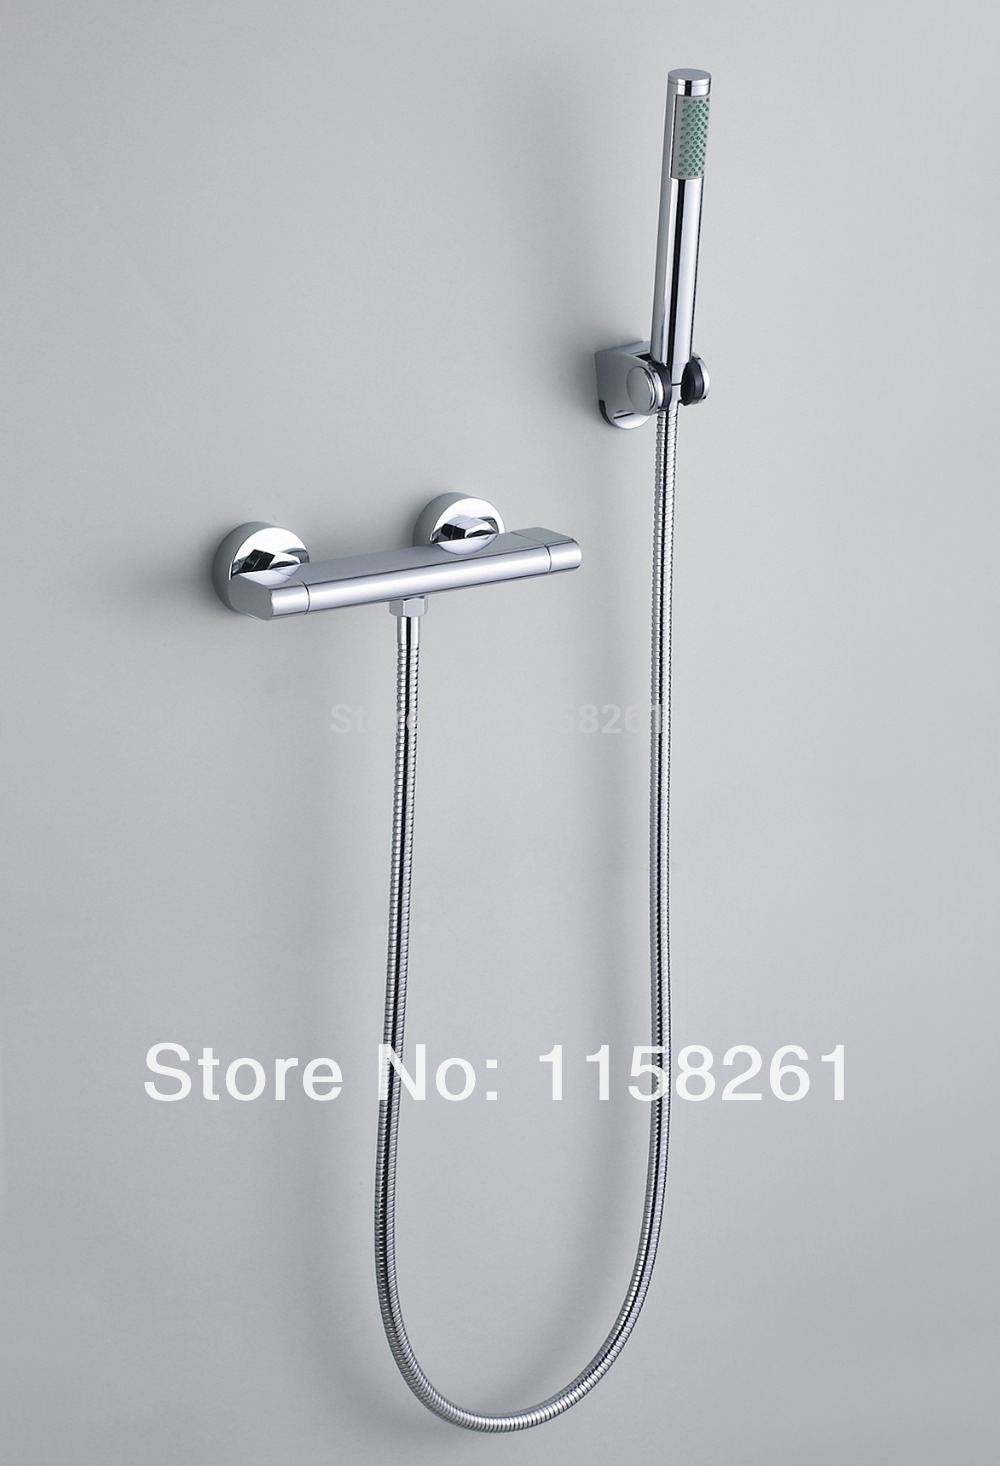 whole and retail promotion wall mounted bath tub faucet with high pressure hand shower shower faucet set 6082